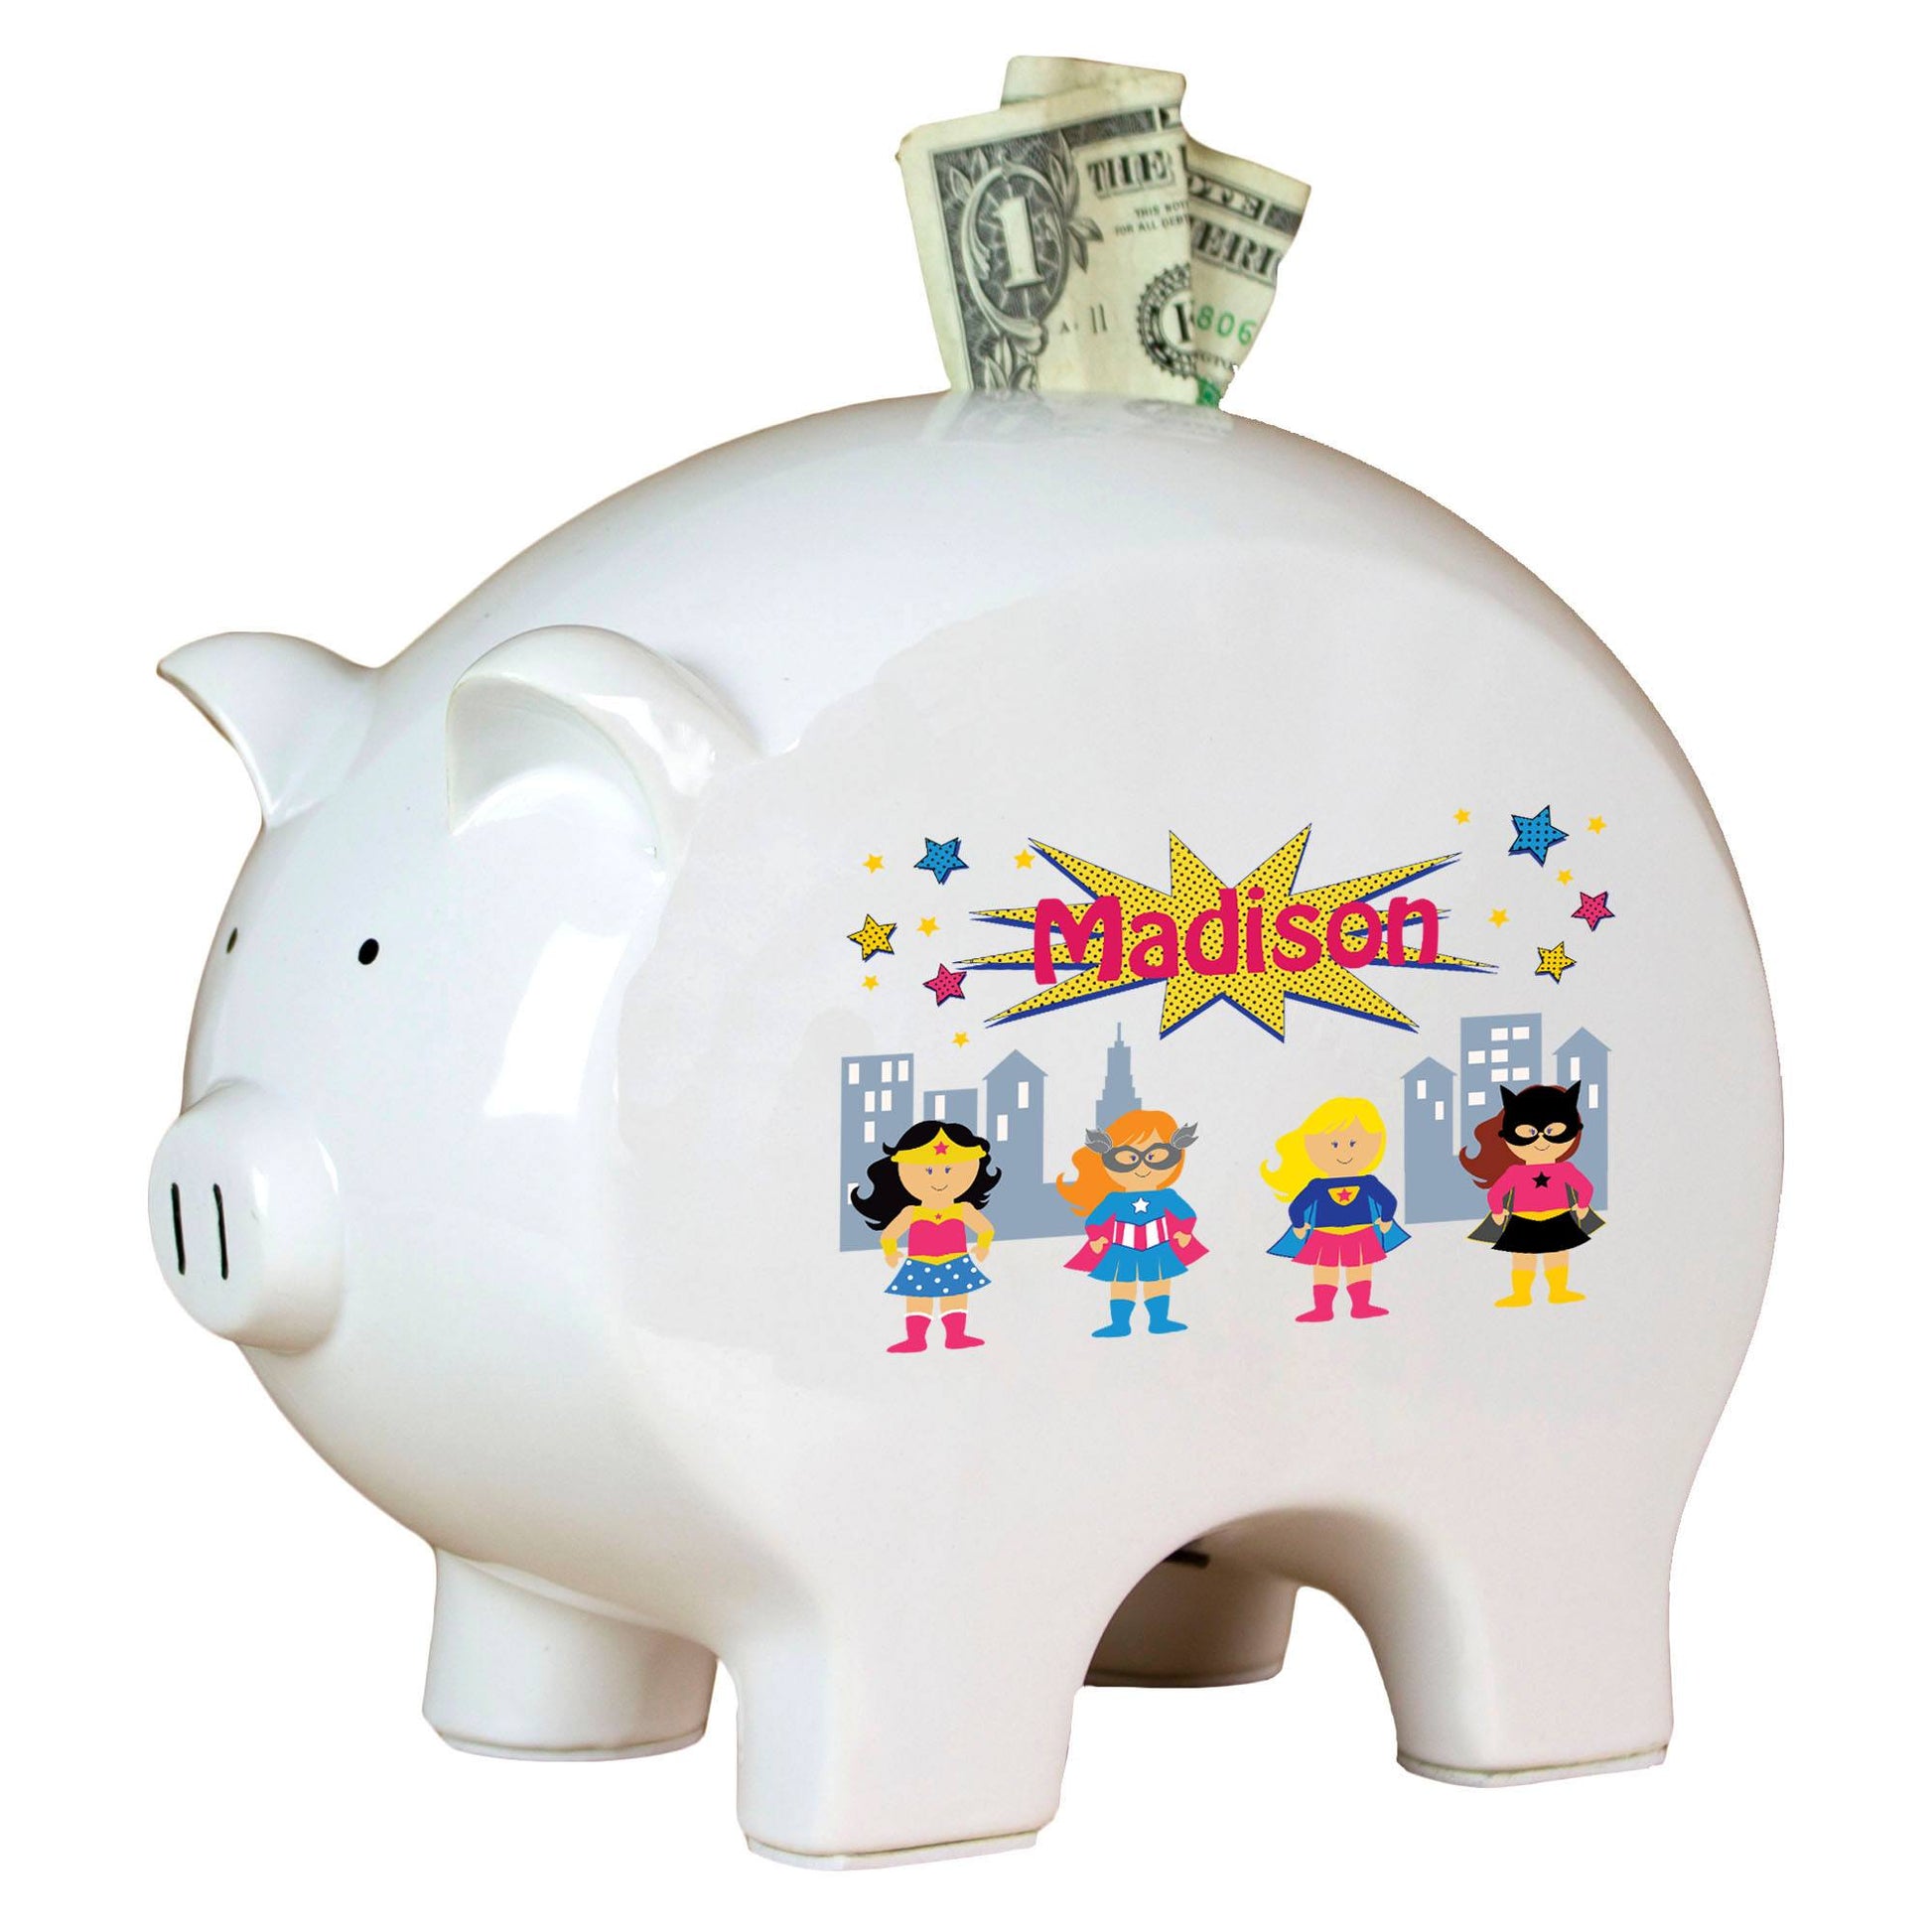 Personalized Piggy Bank with Super hero Girls design